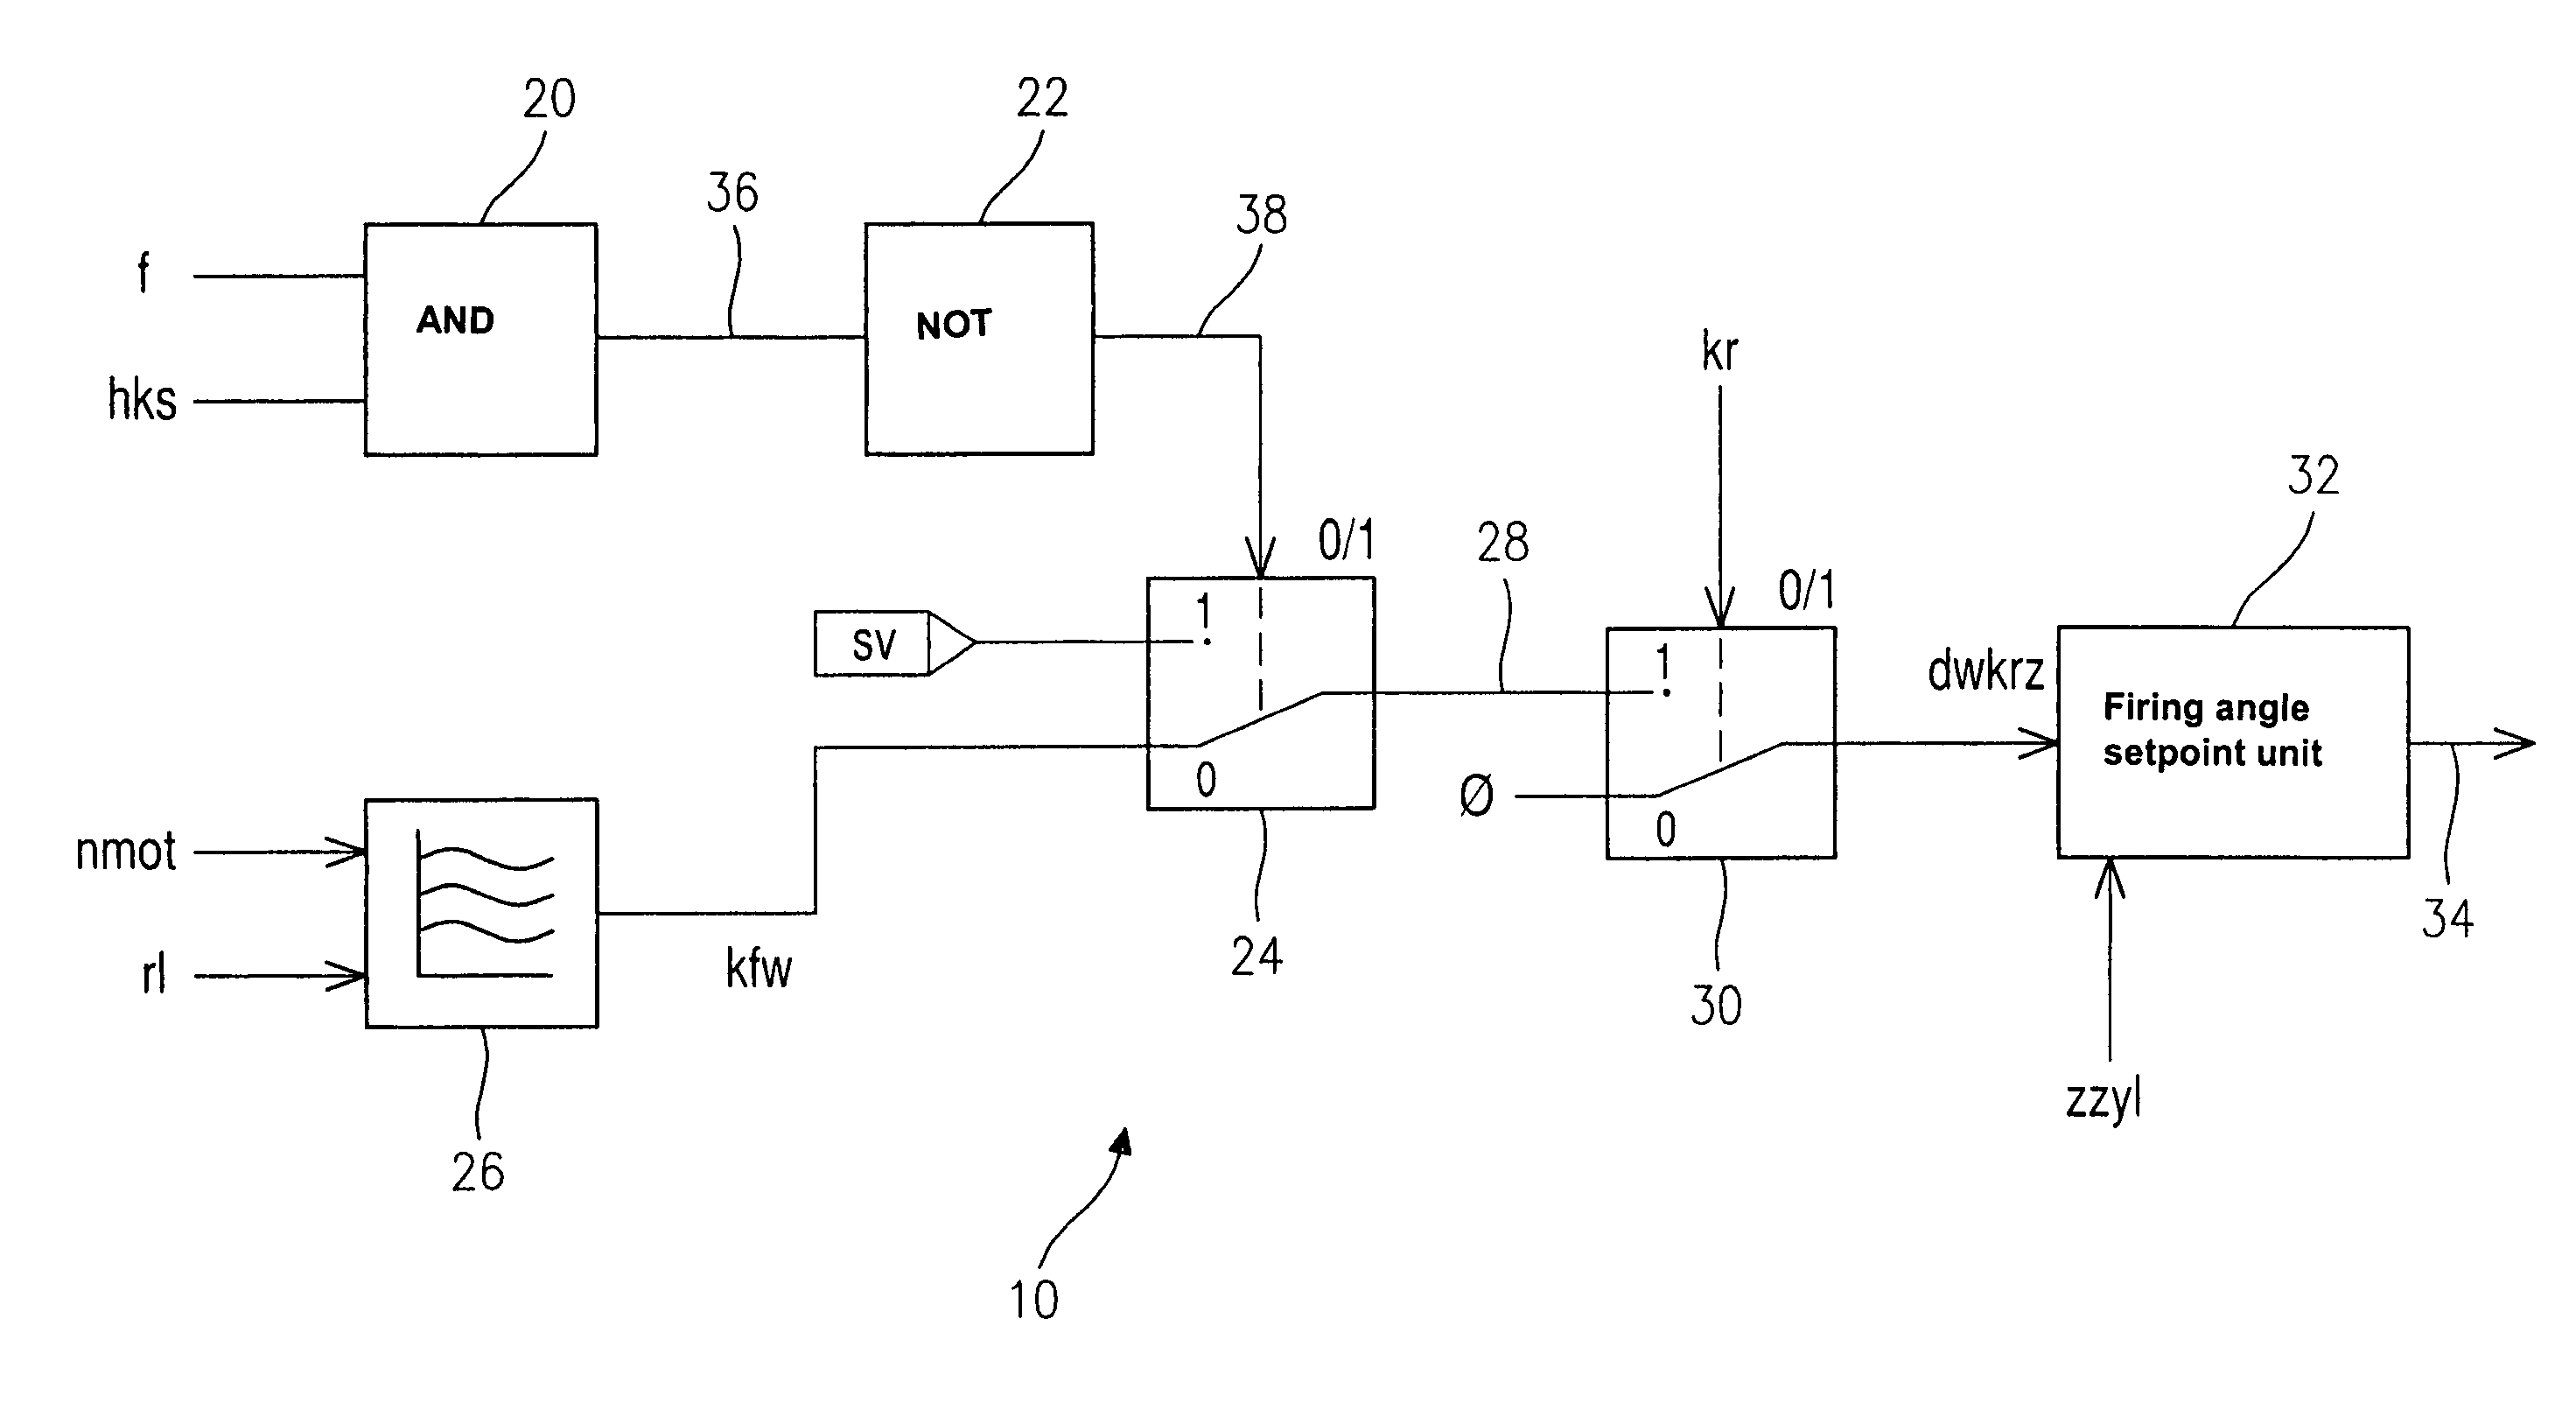 Method and devices for avoiding knocking on failure of an anti-knock regulator